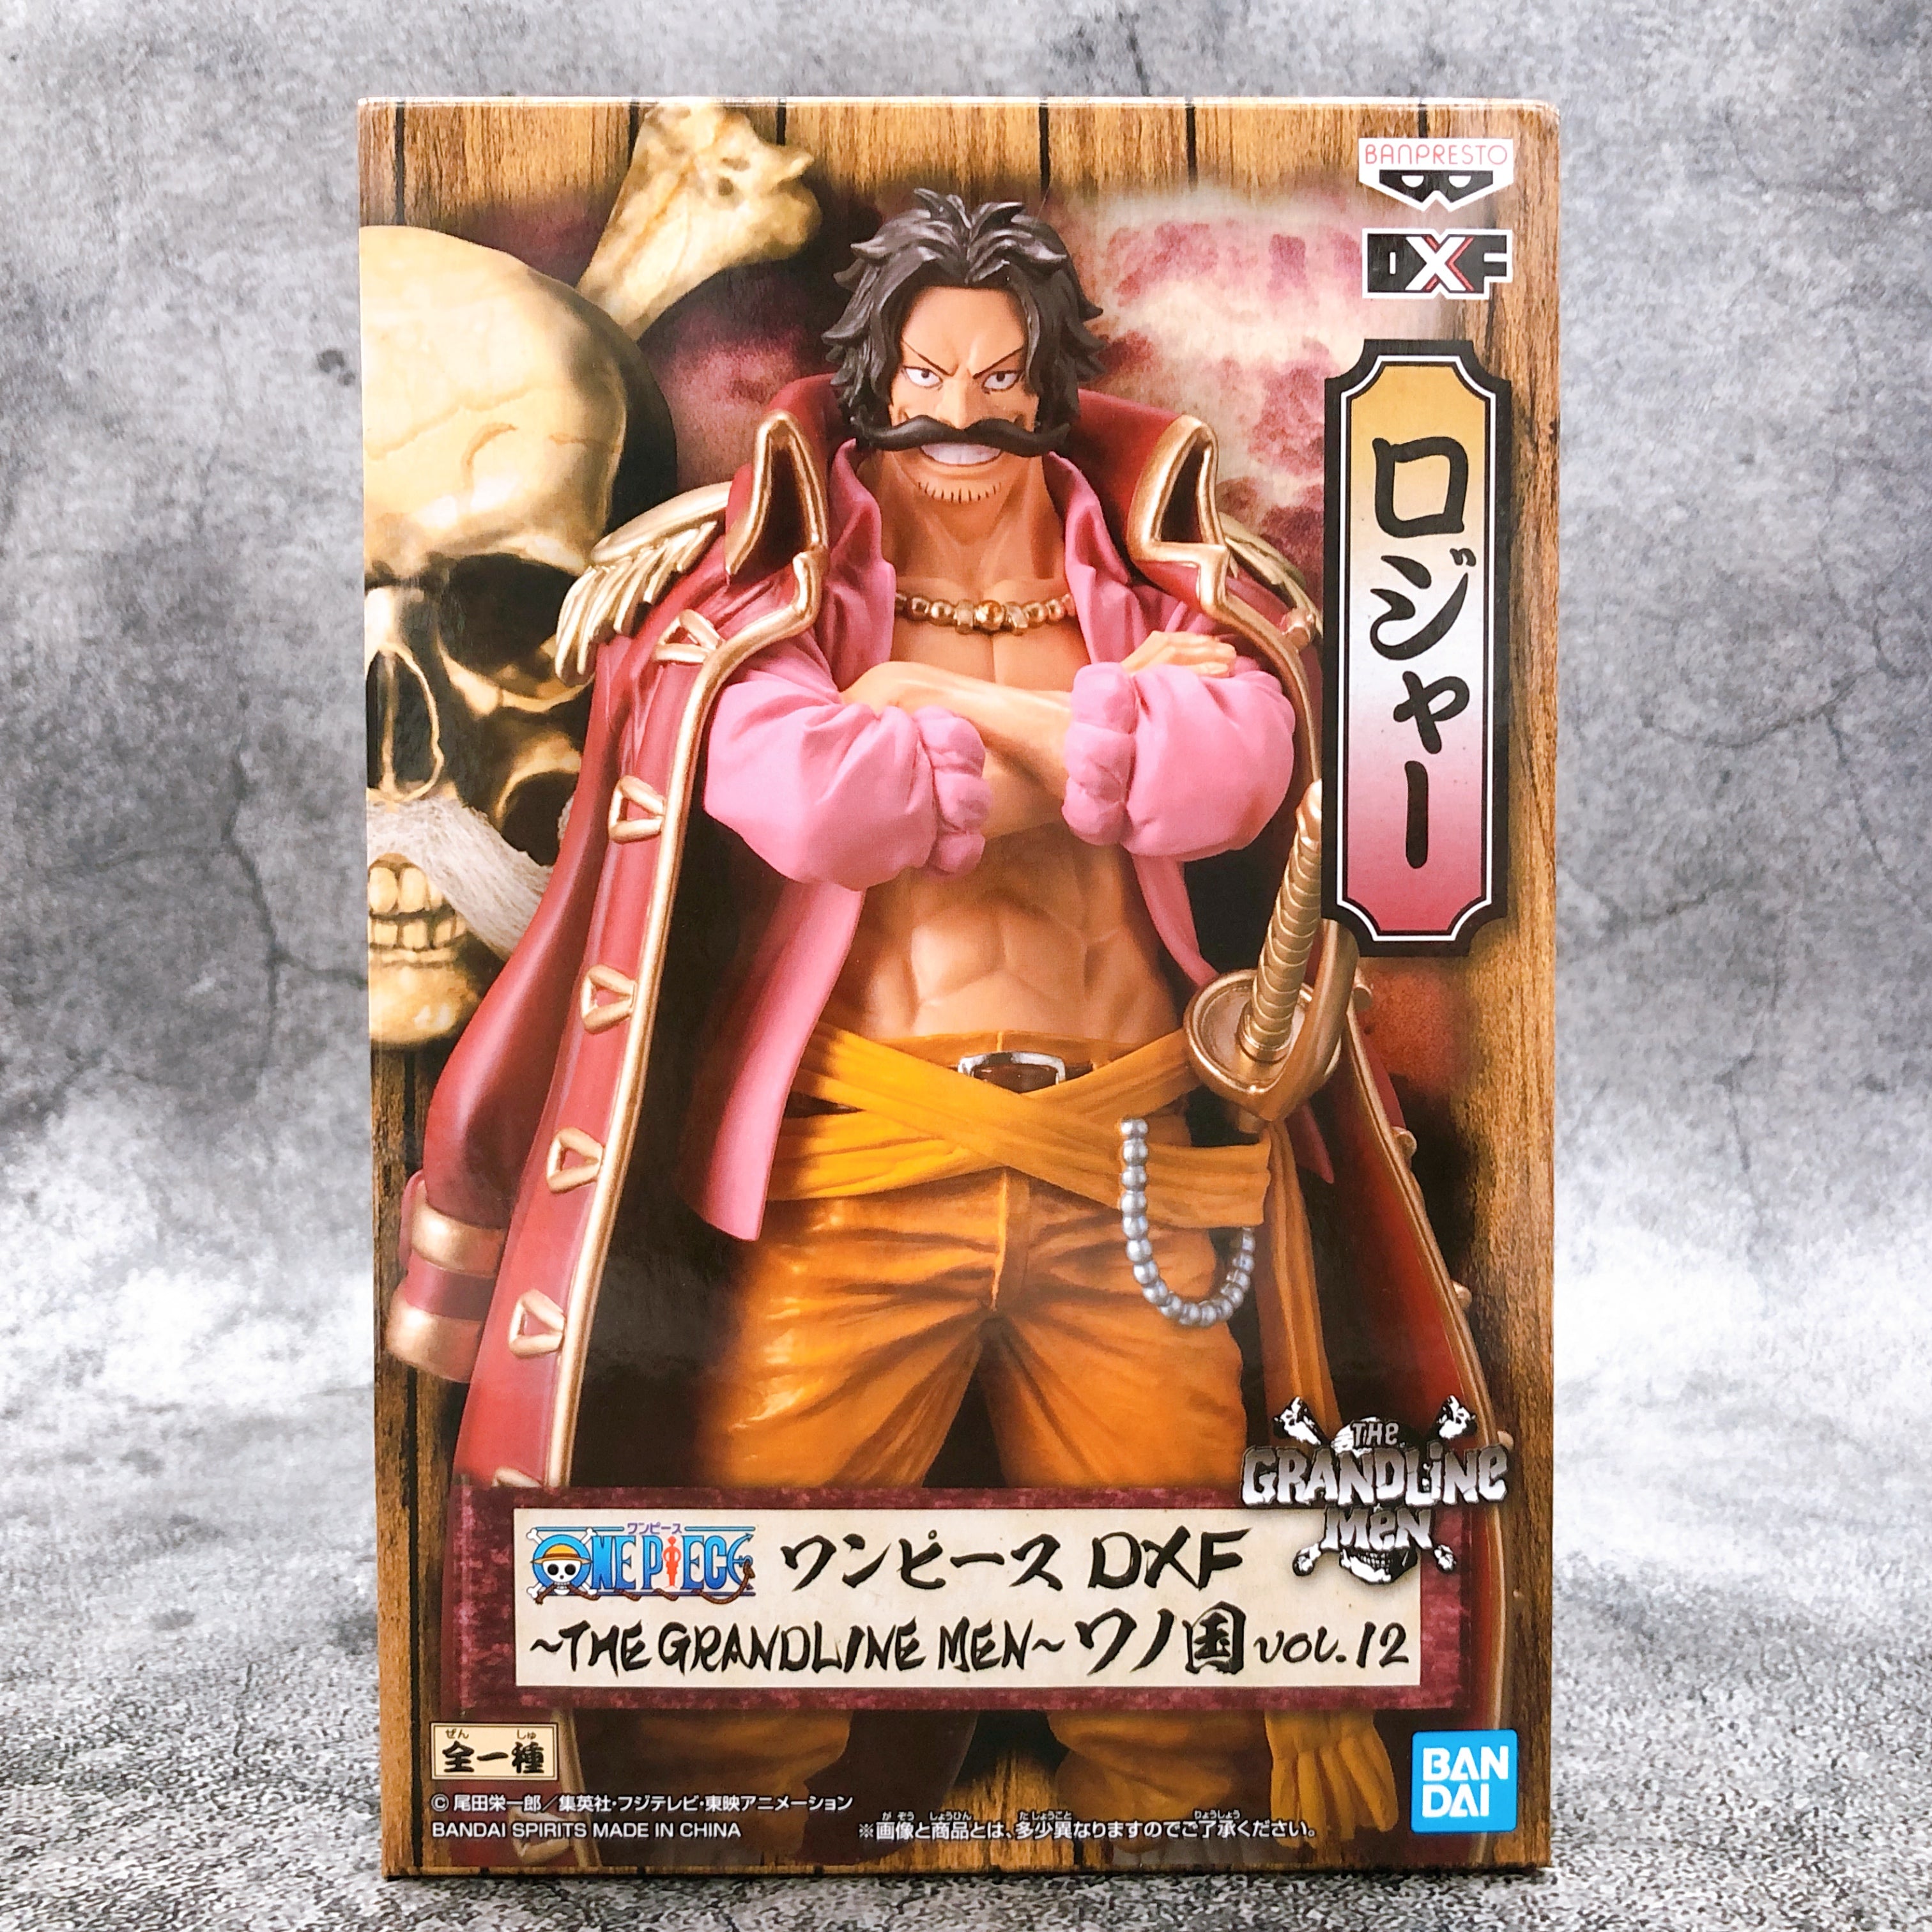 ONE PIECE Gol D. Roger DXF〜THE GRANDLINE MEN〜Wano Country vol.12 